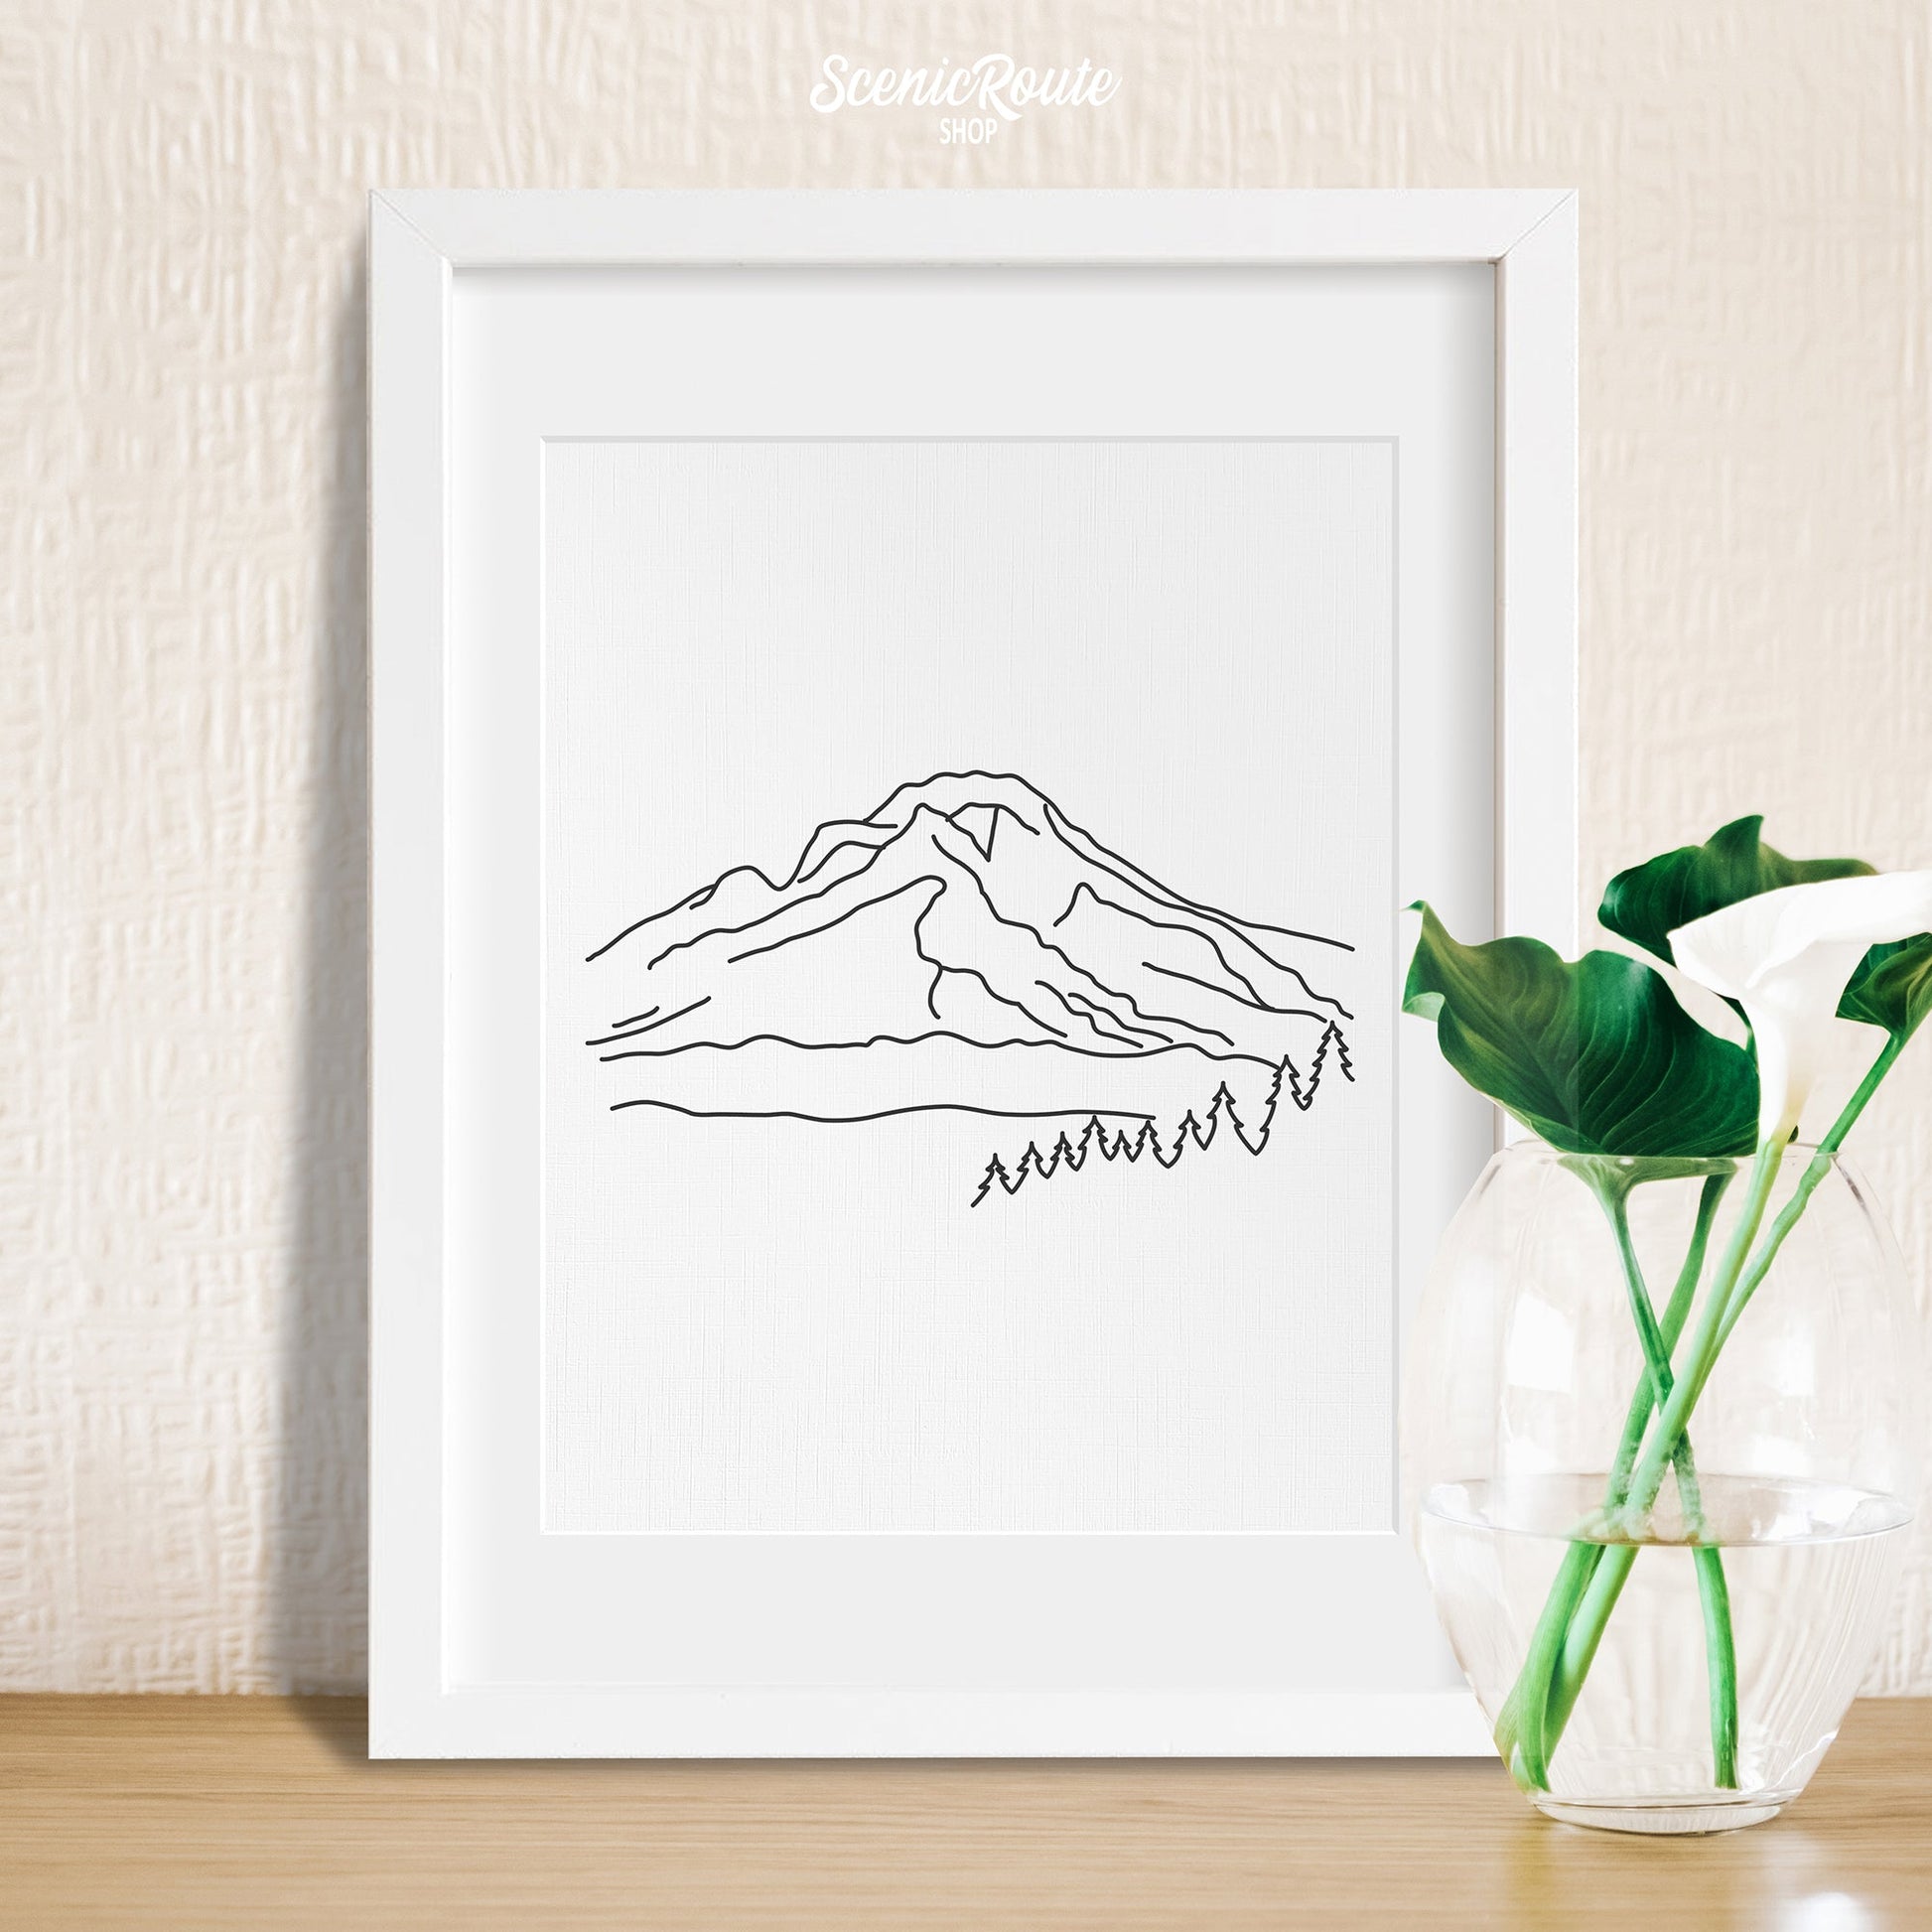 A framed line art drawing of Mount Hood with a vase